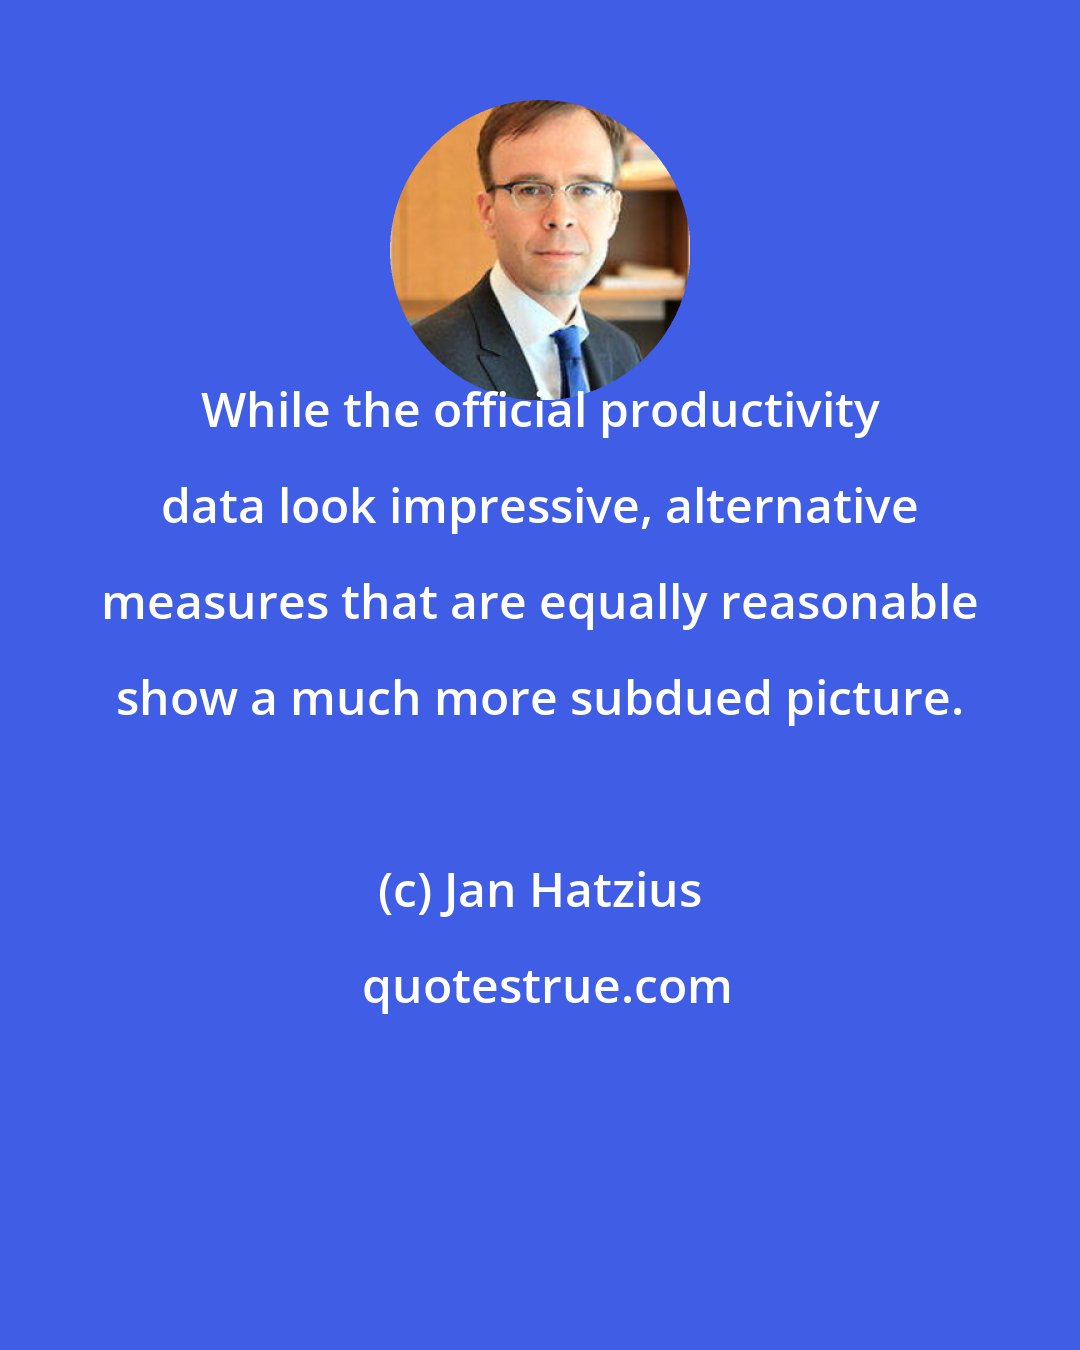 Jan Hatzius: While the official productivity data look impressive, alternative measures that are equally reasonable show a much more subdued picture.